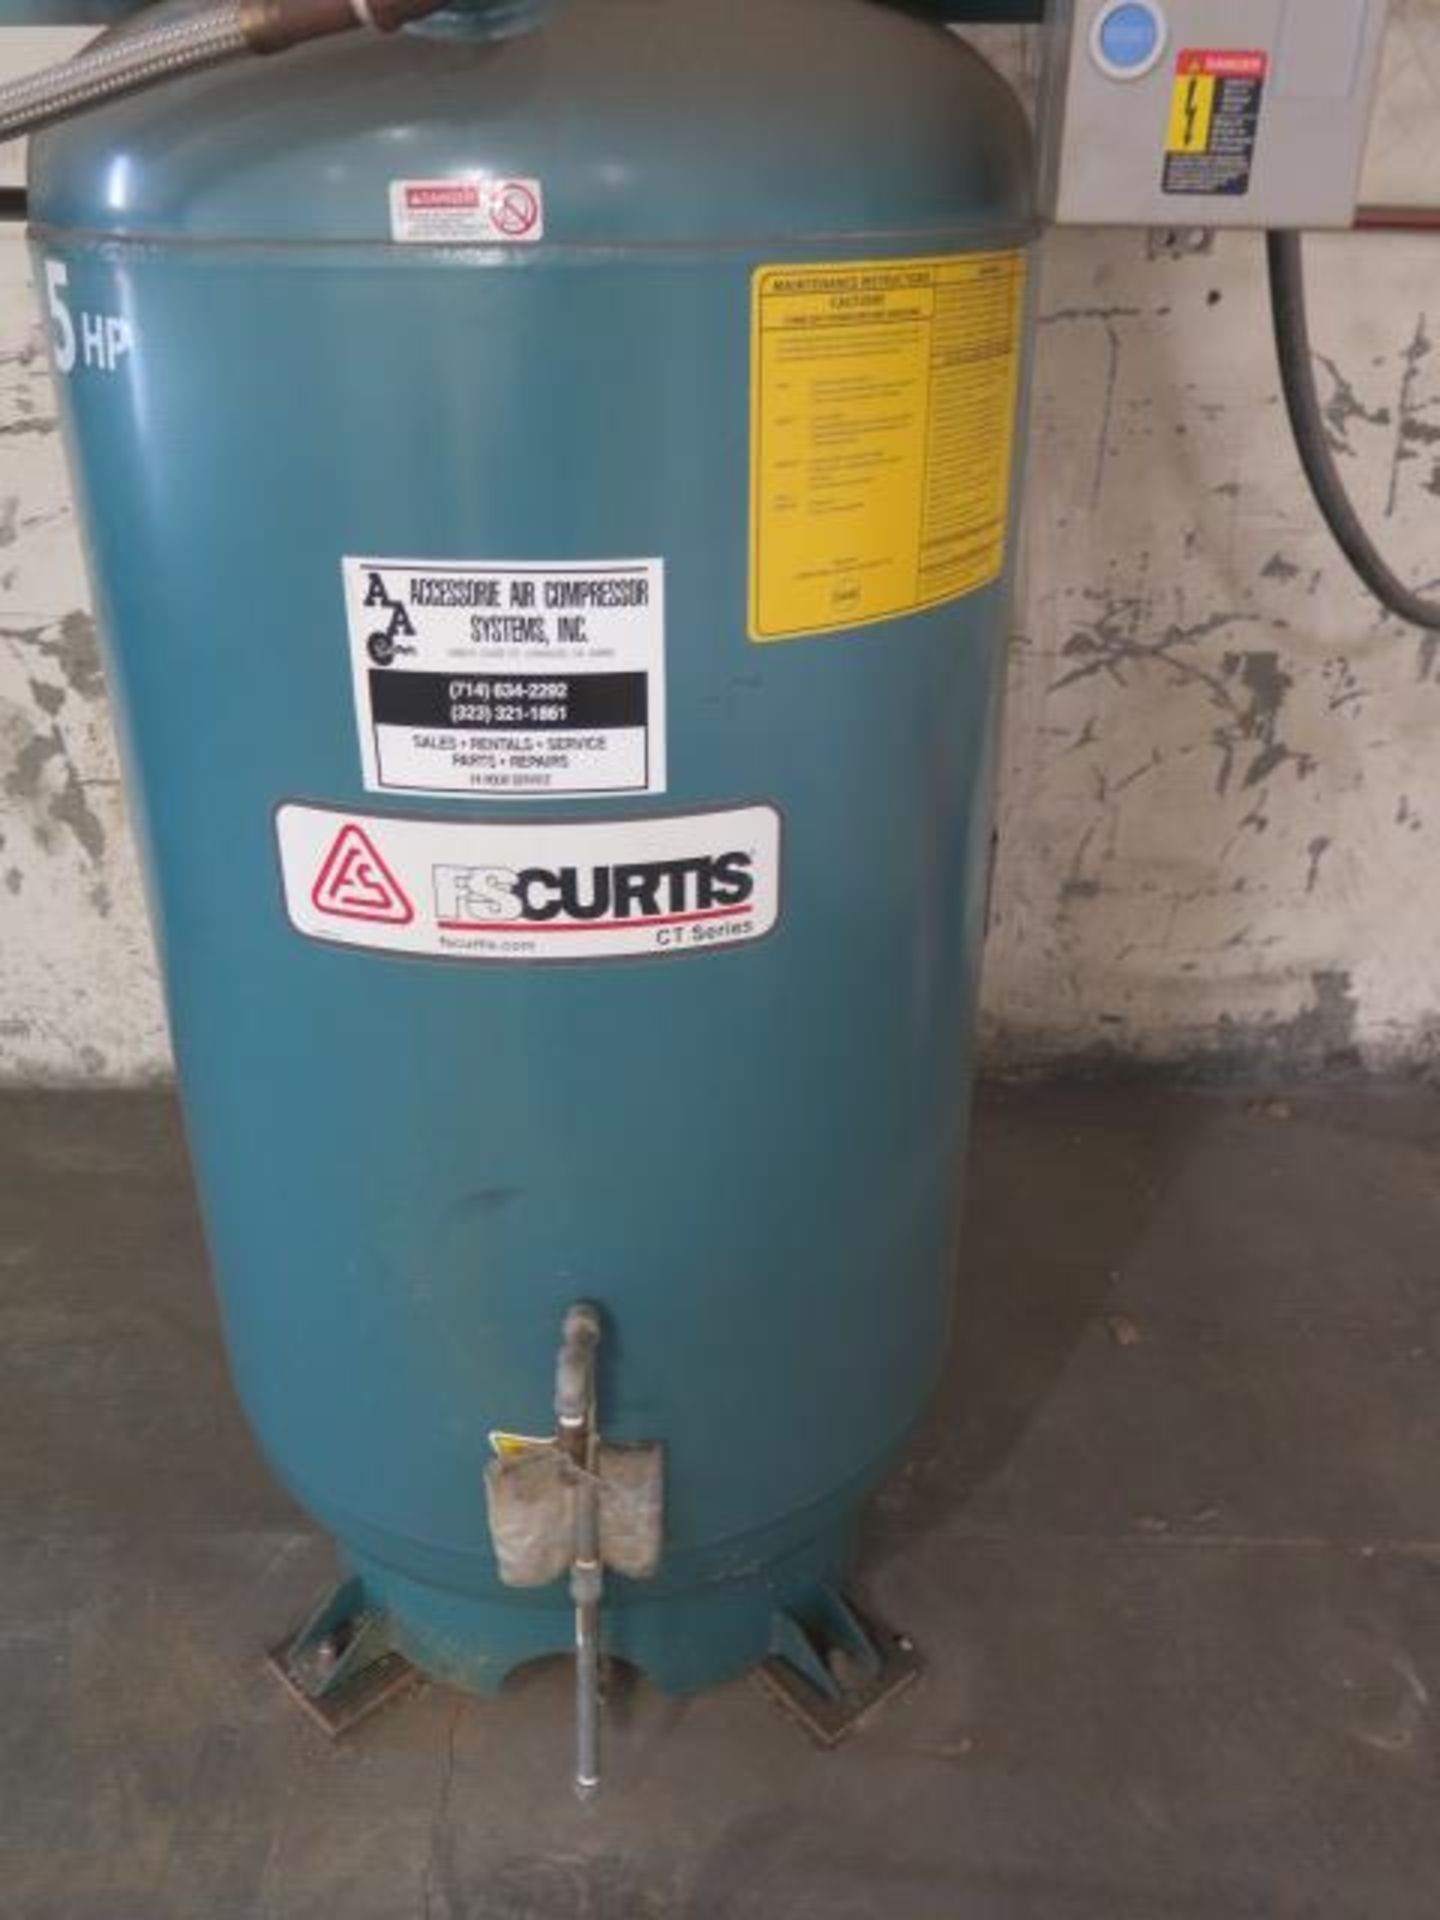 Curtis 5Hp Vertical Air Compressor w/ 80 Gallon Tank (SOLD AS-IS - NO WARRANTY) - Image 3 of 5